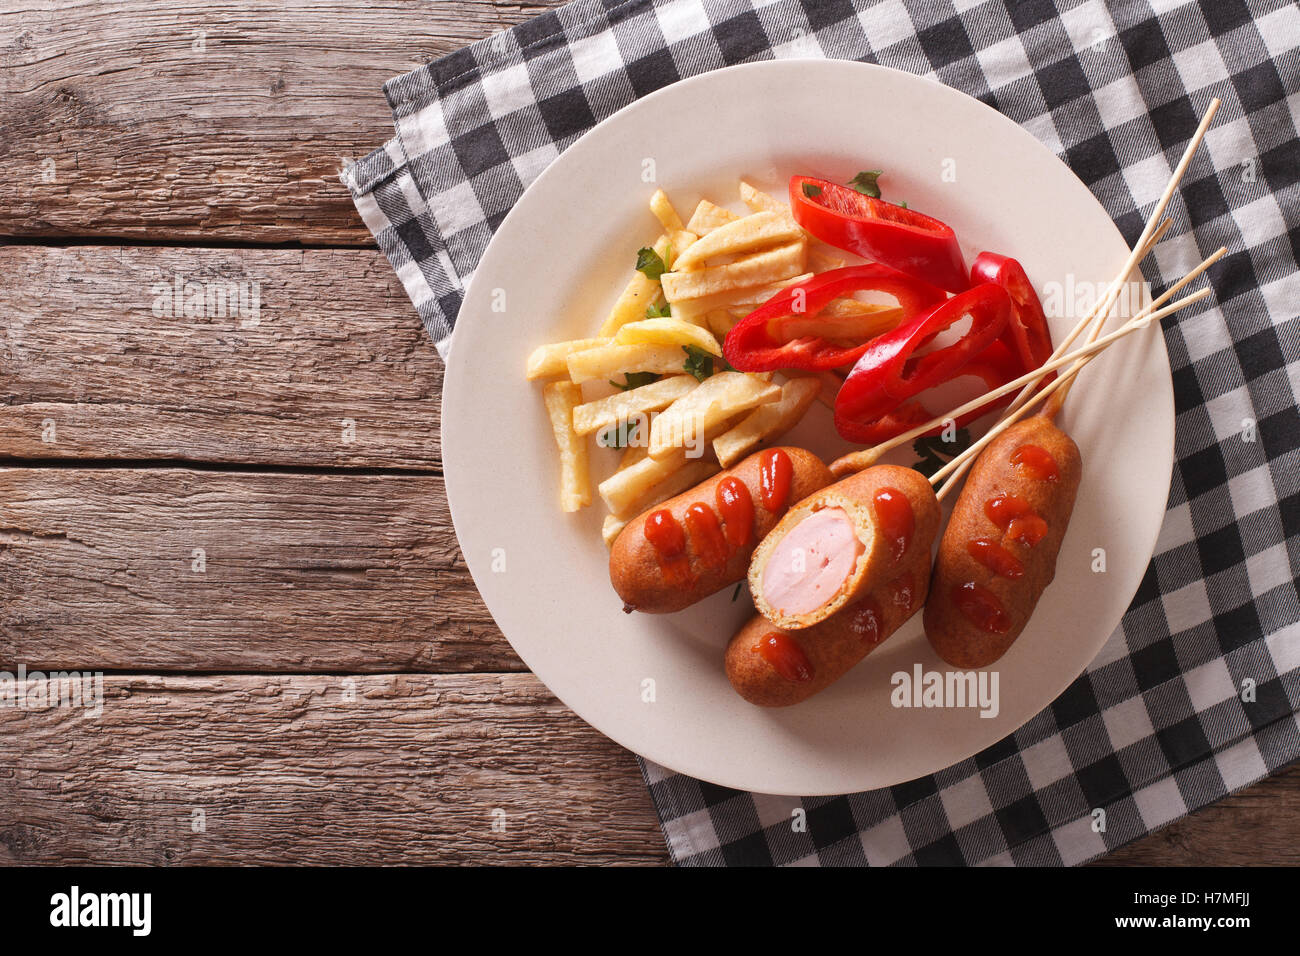 Corn dog with fries and vegetables on a plate close-up on the table. Horizontal top view Stock Photo